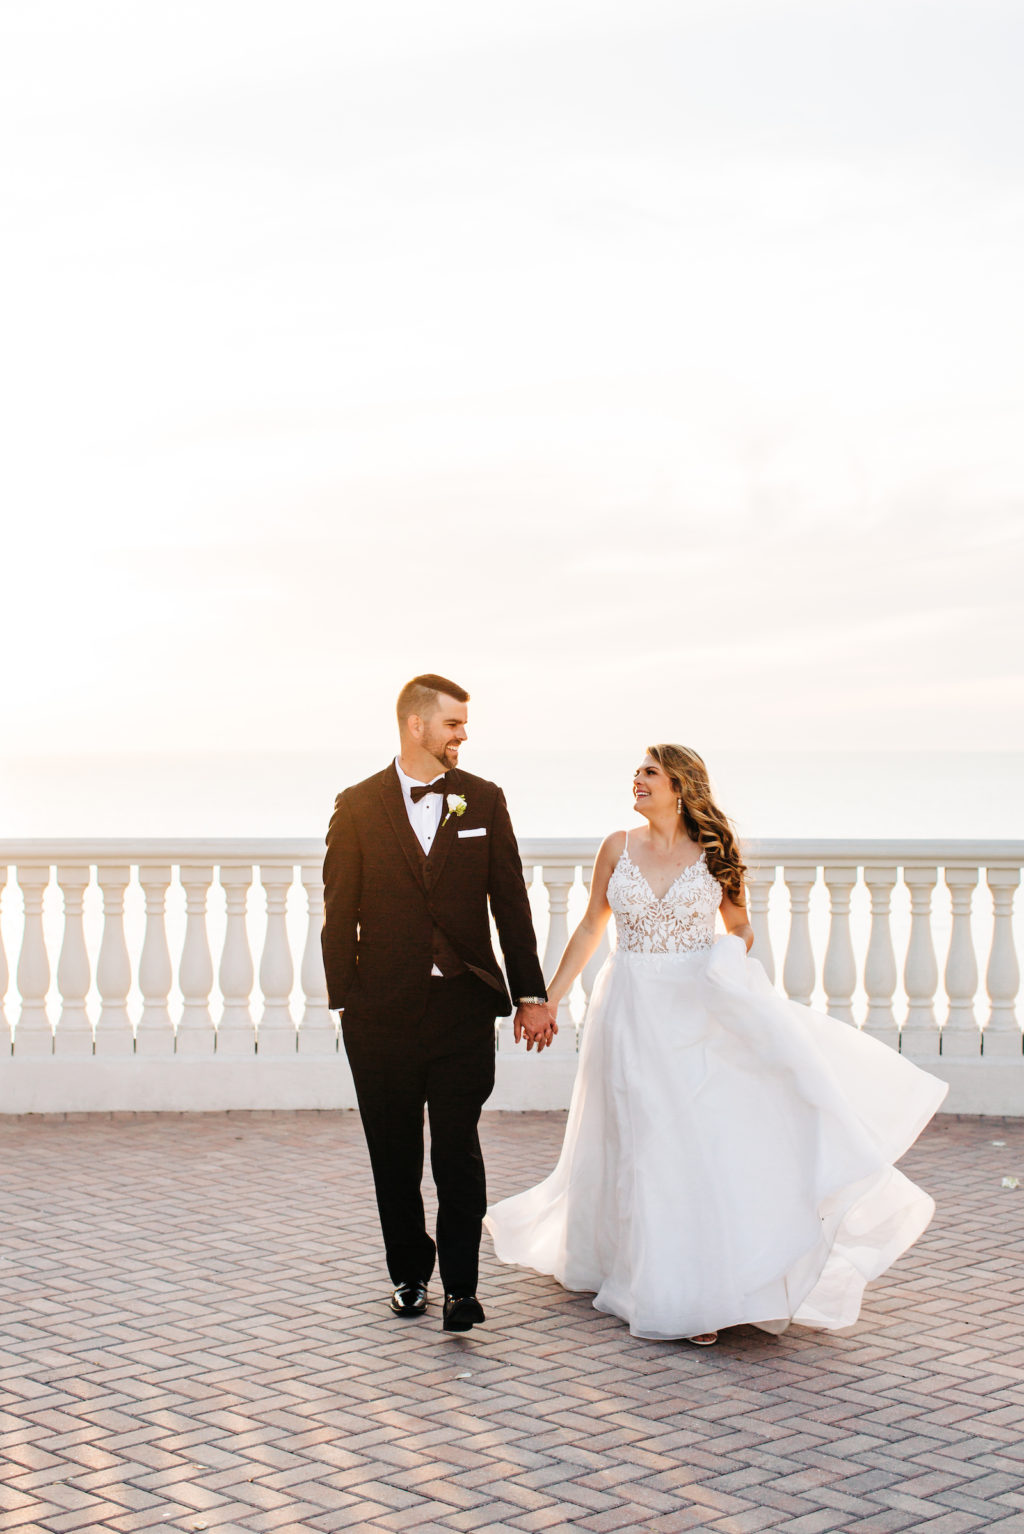 Tampa Bay Bride and Groom Wedding Portrait at Sunset on Waterfront Hotel Rooftop Balcony, Bride Wearing Romantic A Line Mikaella Bridal Wedding Dress, Groom in Classic Black Tuxedo with Bowtie | Florida Wedding Venue and Resort Hyatt Regency Clearwater Beach